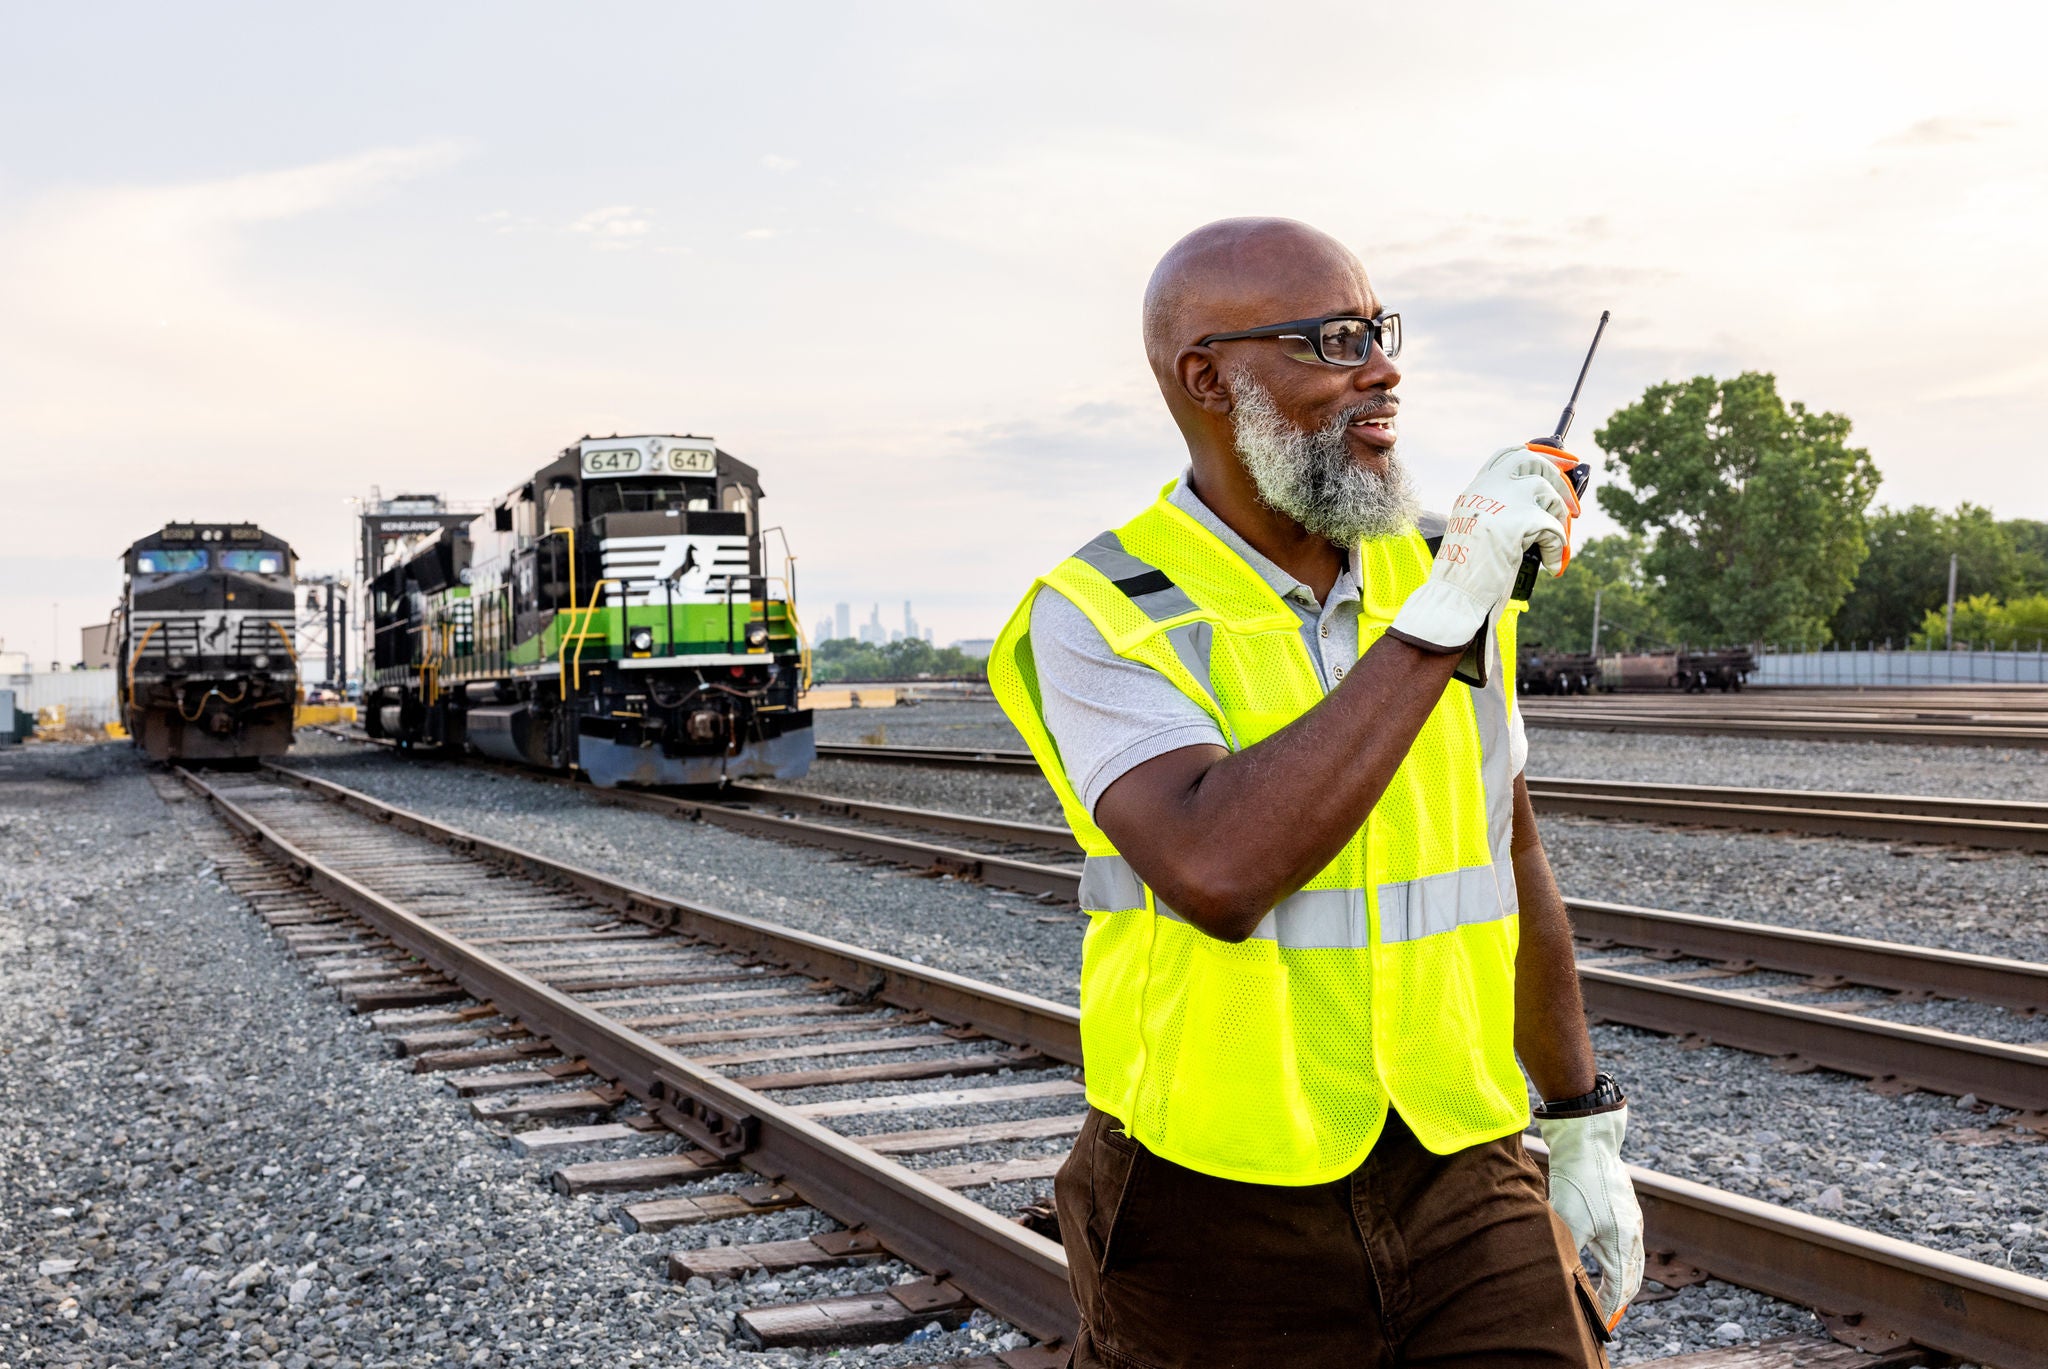 norfolk southern craft employee in railway job standing in front of locomotives with handheld transceiver